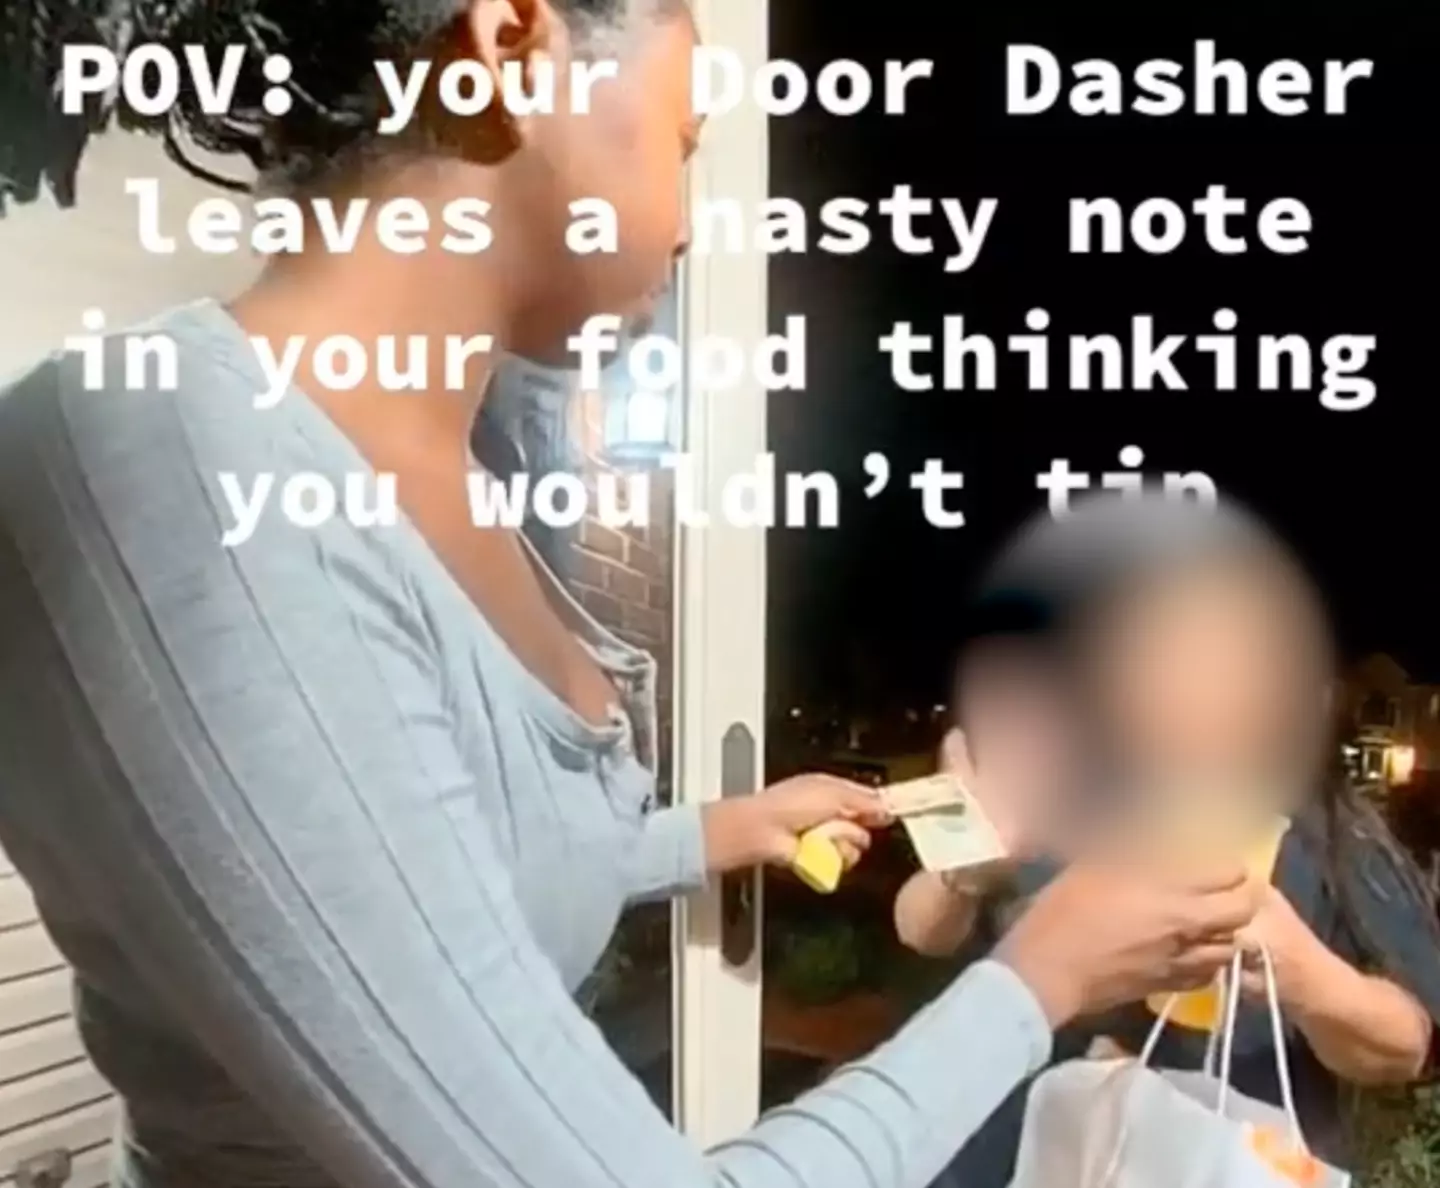 The DoorDash driver apologized as she delivered the food.